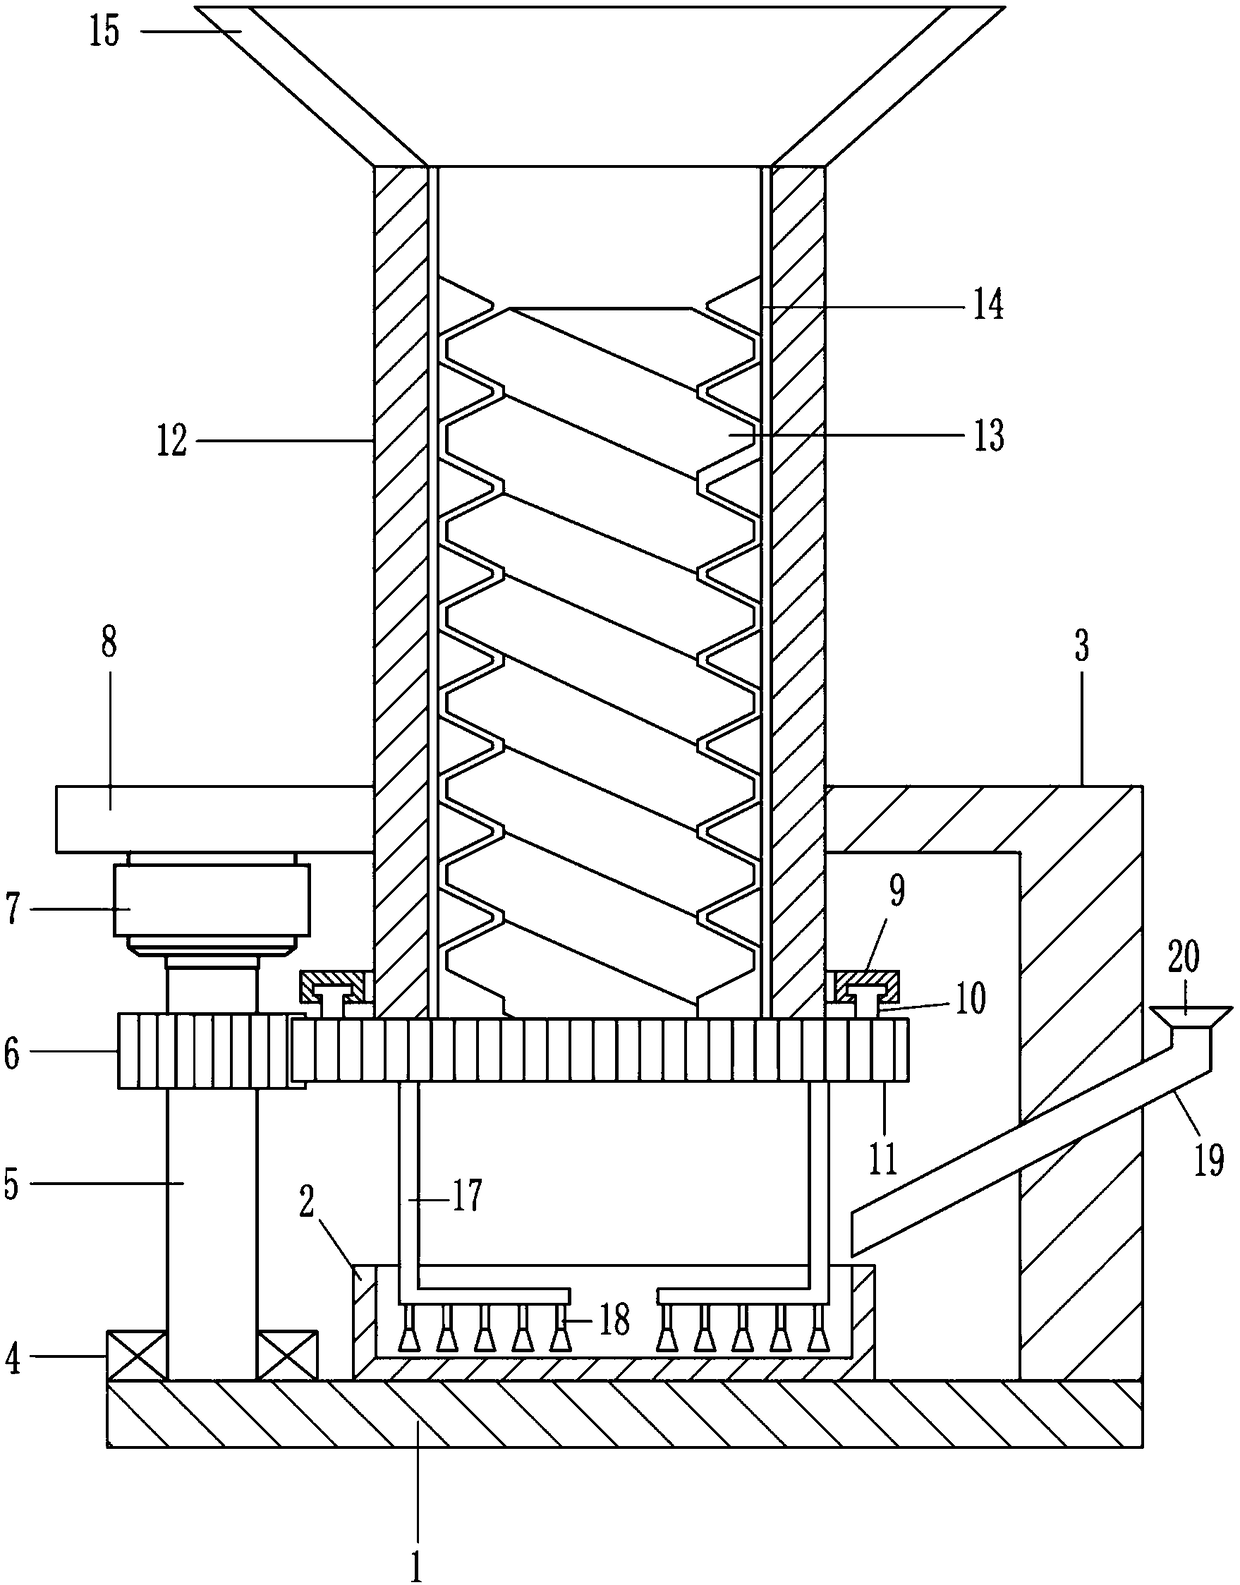 Production device for chili paste for food processing